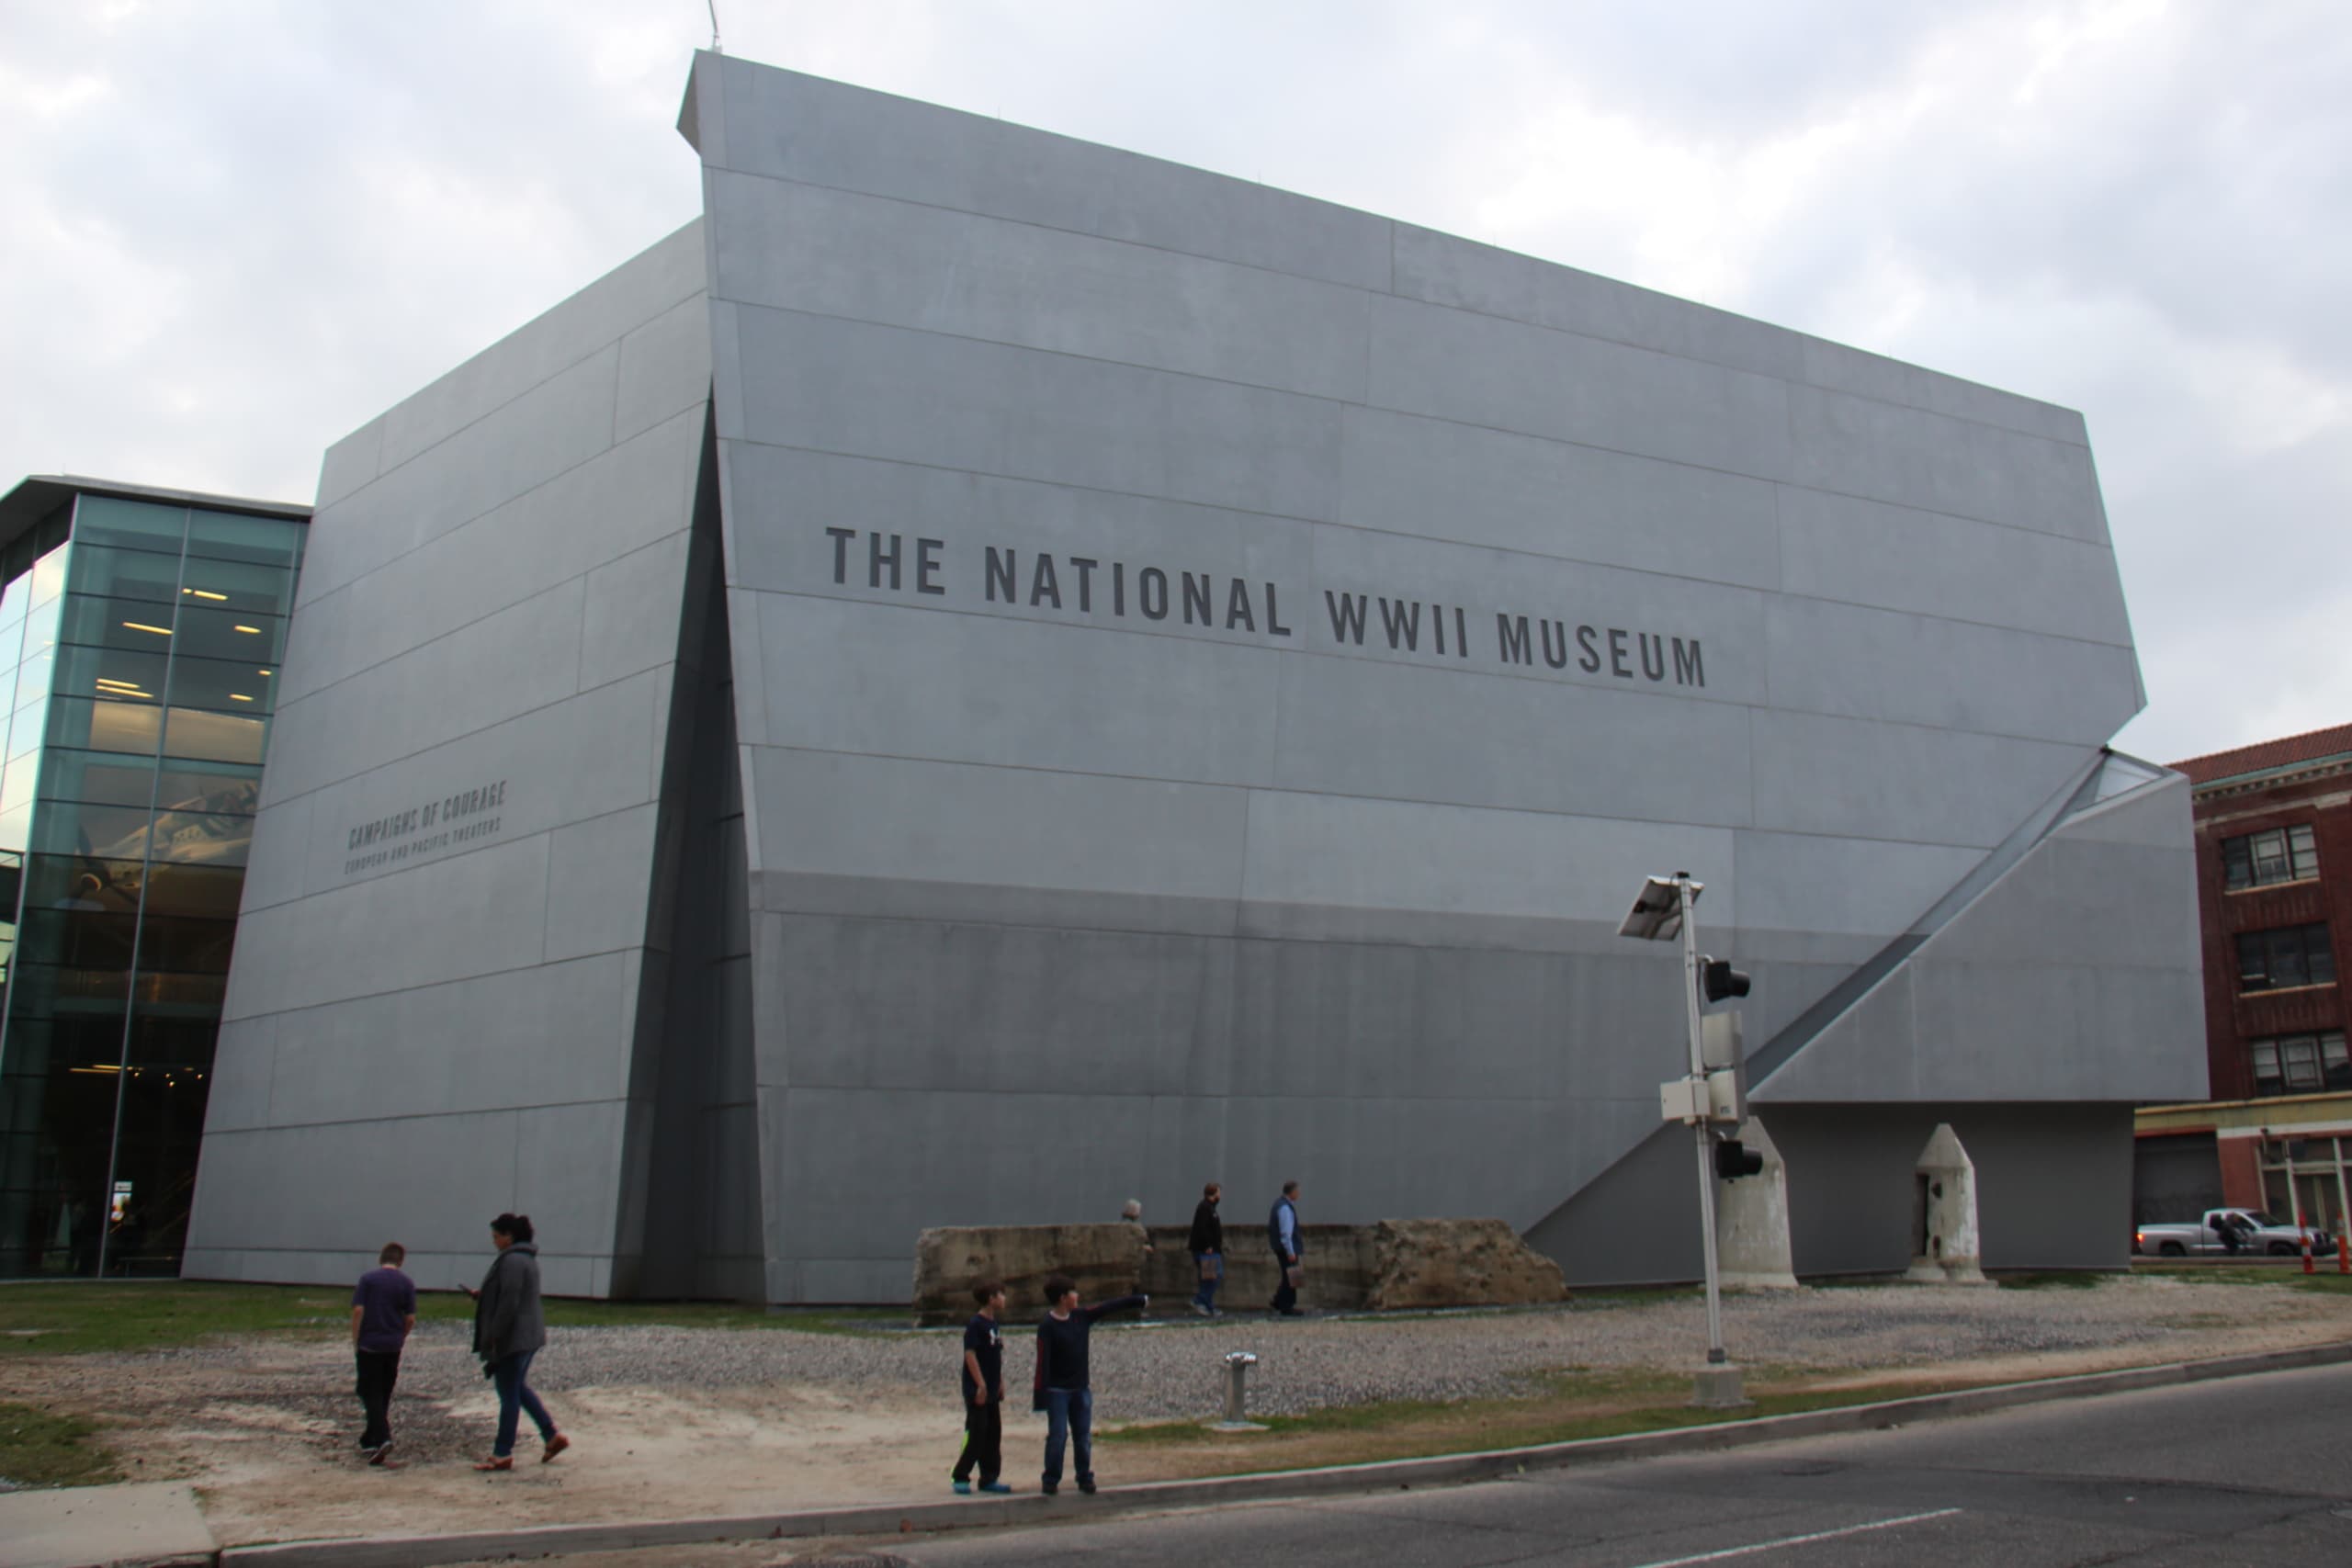 The World War II museum, with several visitors standing outside. The museum offers immersive exhibits and preserves the story of WWII while honoring those lost during the events.